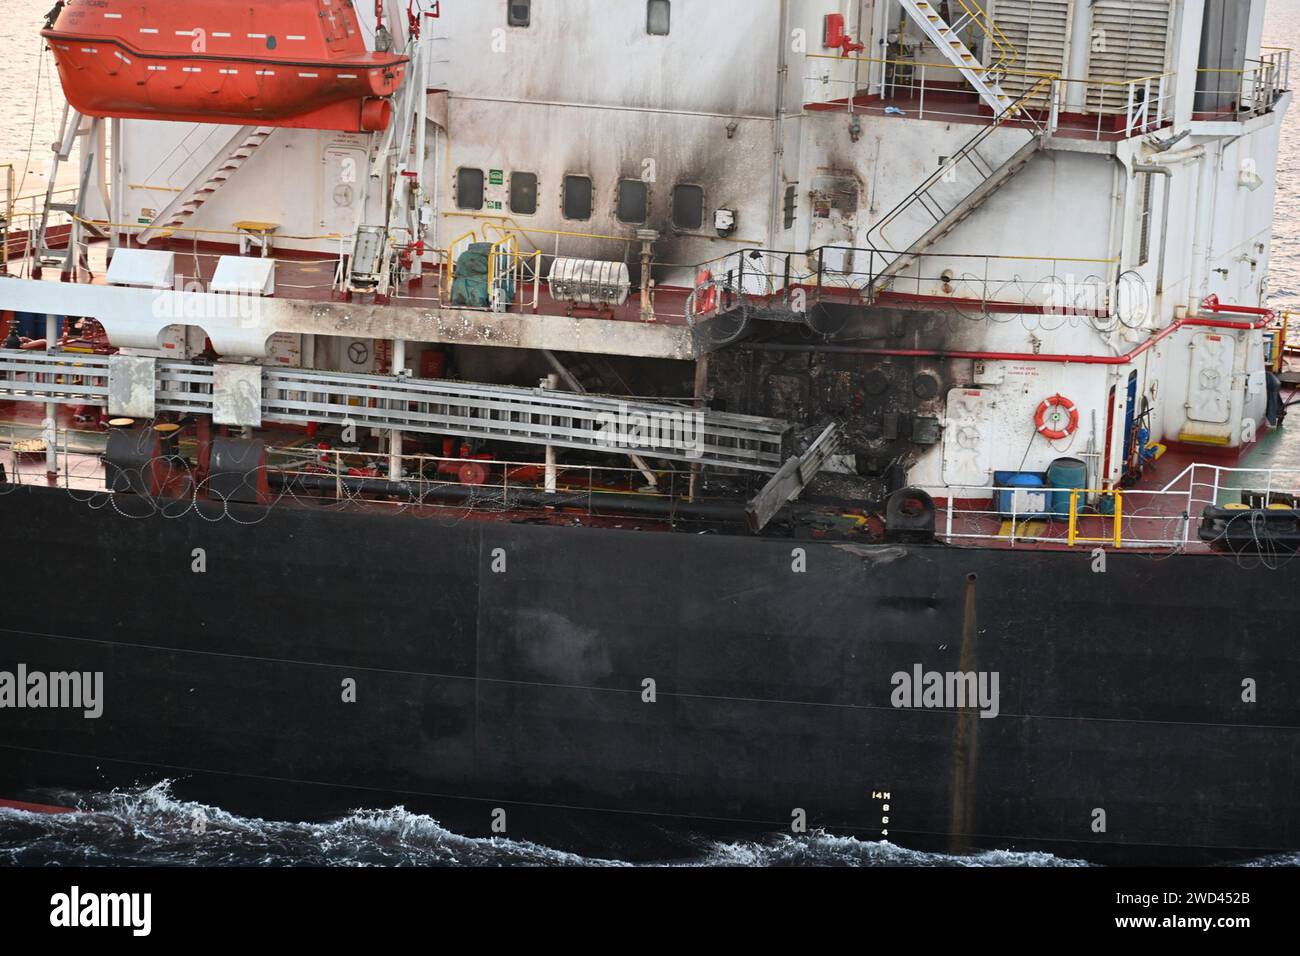 Washington, United States. 18th Jan, 2024. View of the damage caused by a drone attack on Wednesday, January 17, 2024, to the U.S.-owned Marshall Island flagged MV Genco Picardy in the Gulf of Aden. INS Visakhapatnam, undertaking anti-piracy patrol in the Gulf of Aden, acknowledged the distress call and intercepted the vessel in the early morning of January 18, 2024, to provide assistance. Indian Naval EOD specialists, after a thorough inspection, have rendered the vessel safe and is proceeding to the next port of call. Photo via Indian Navy/UPI Credit: UPI/Alamy Live News Stock Photo